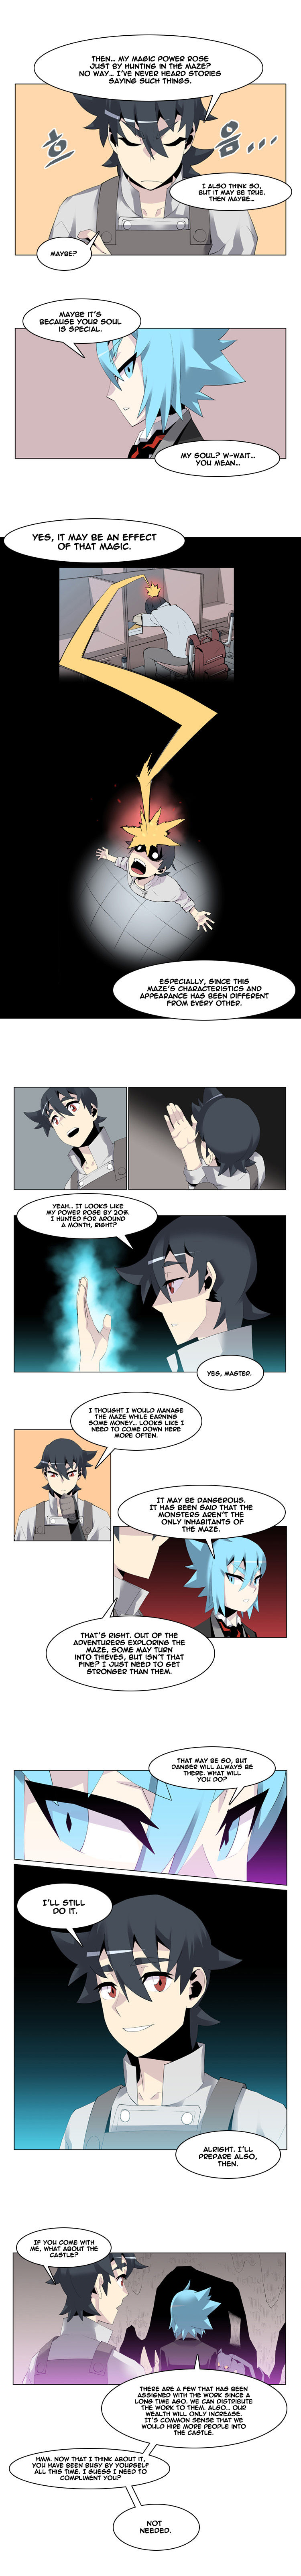 Maze Age Z Chapter 7 Page 4